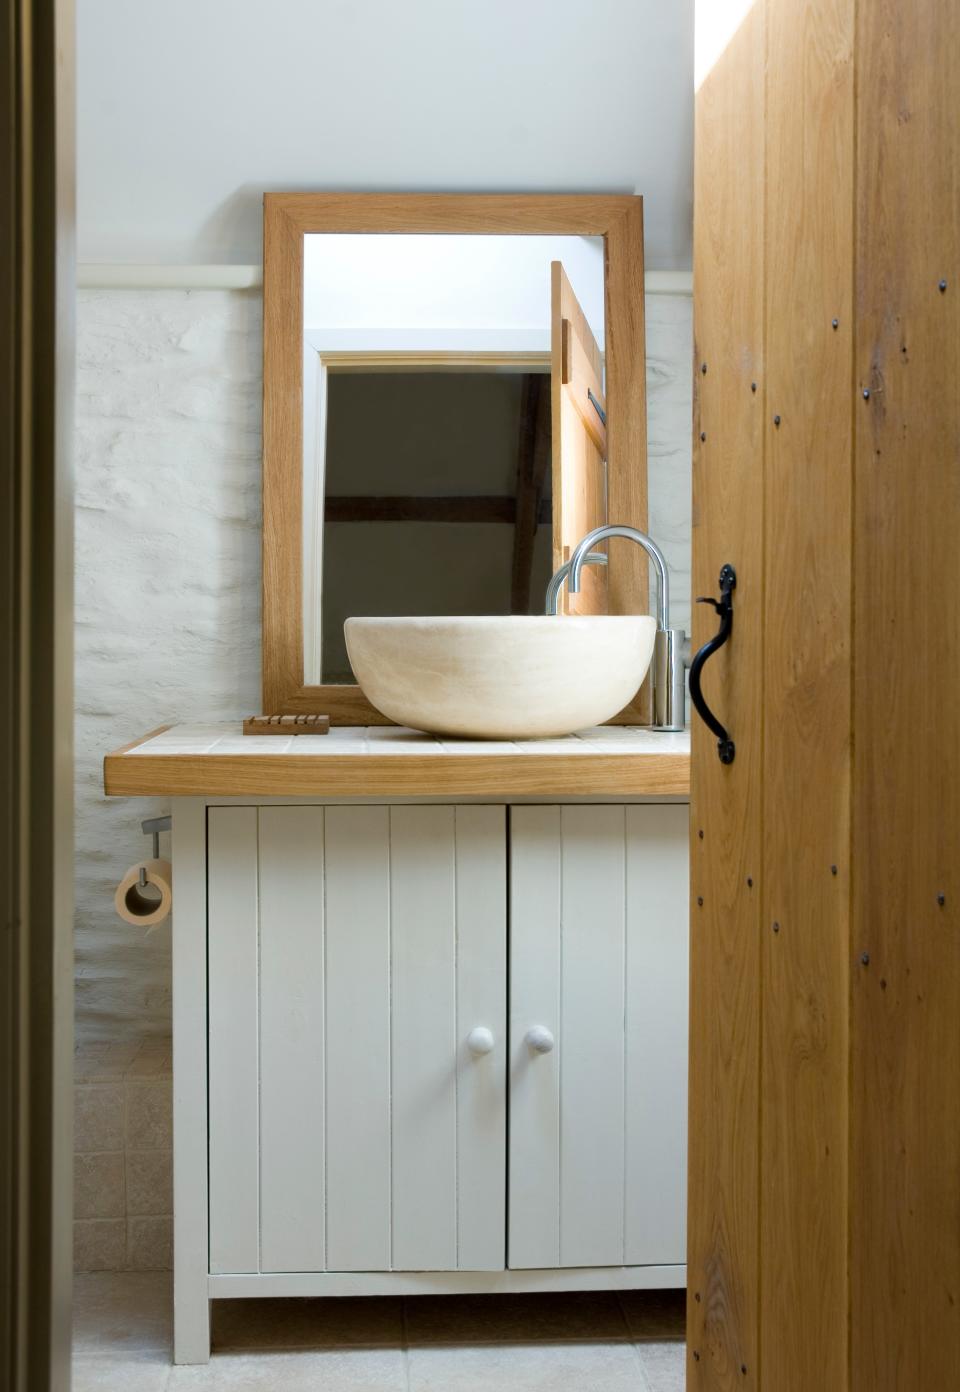 A bathroom vanity has a one-of-a-kind vibe when DIY is involved.